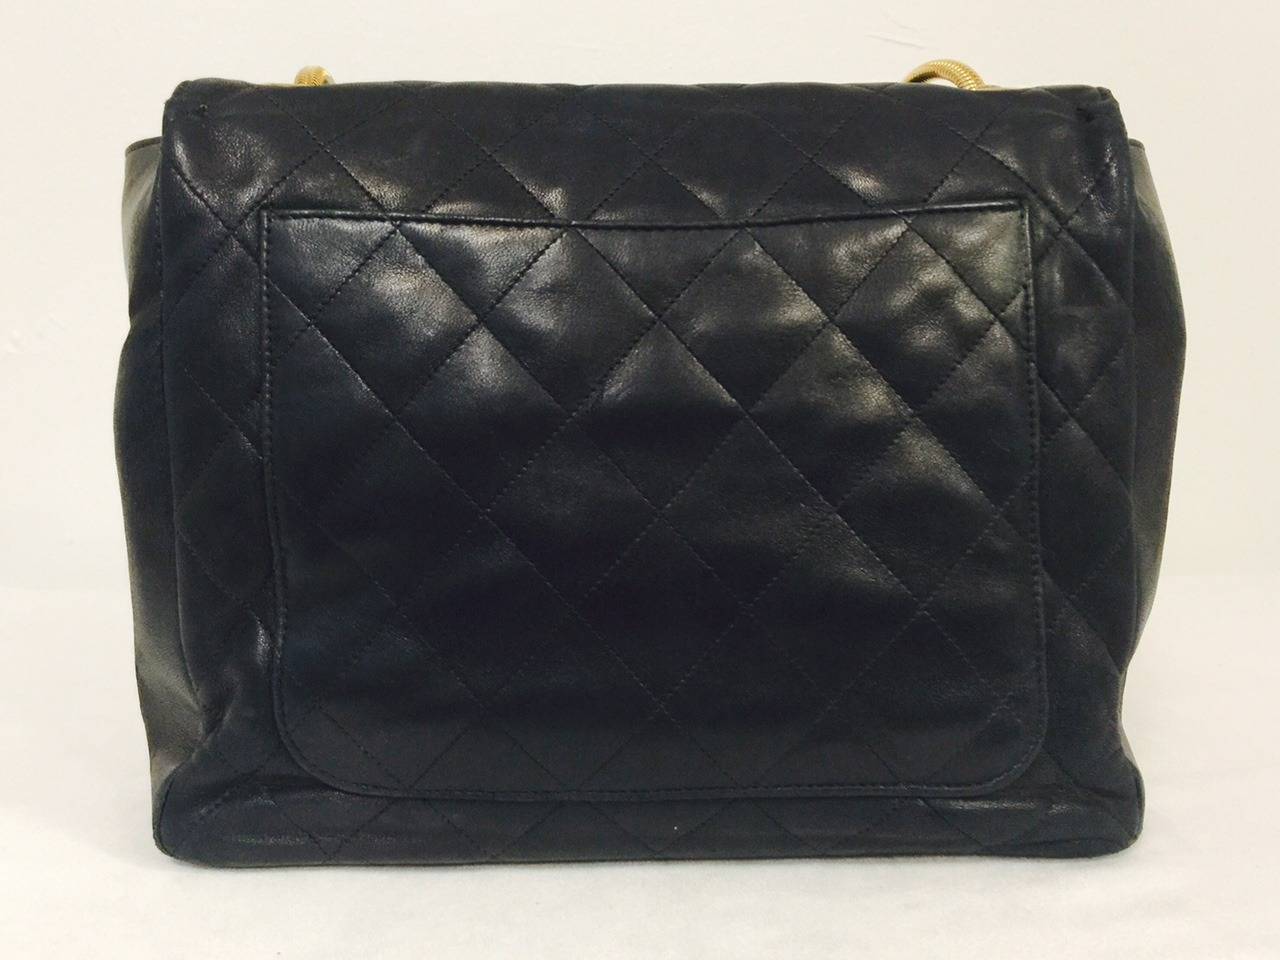 1990s Chanel Black Quilted Lambskin Shoulder Bag With Serpentine Strap In Excellent Condition For Sale In Palm Beach, FL